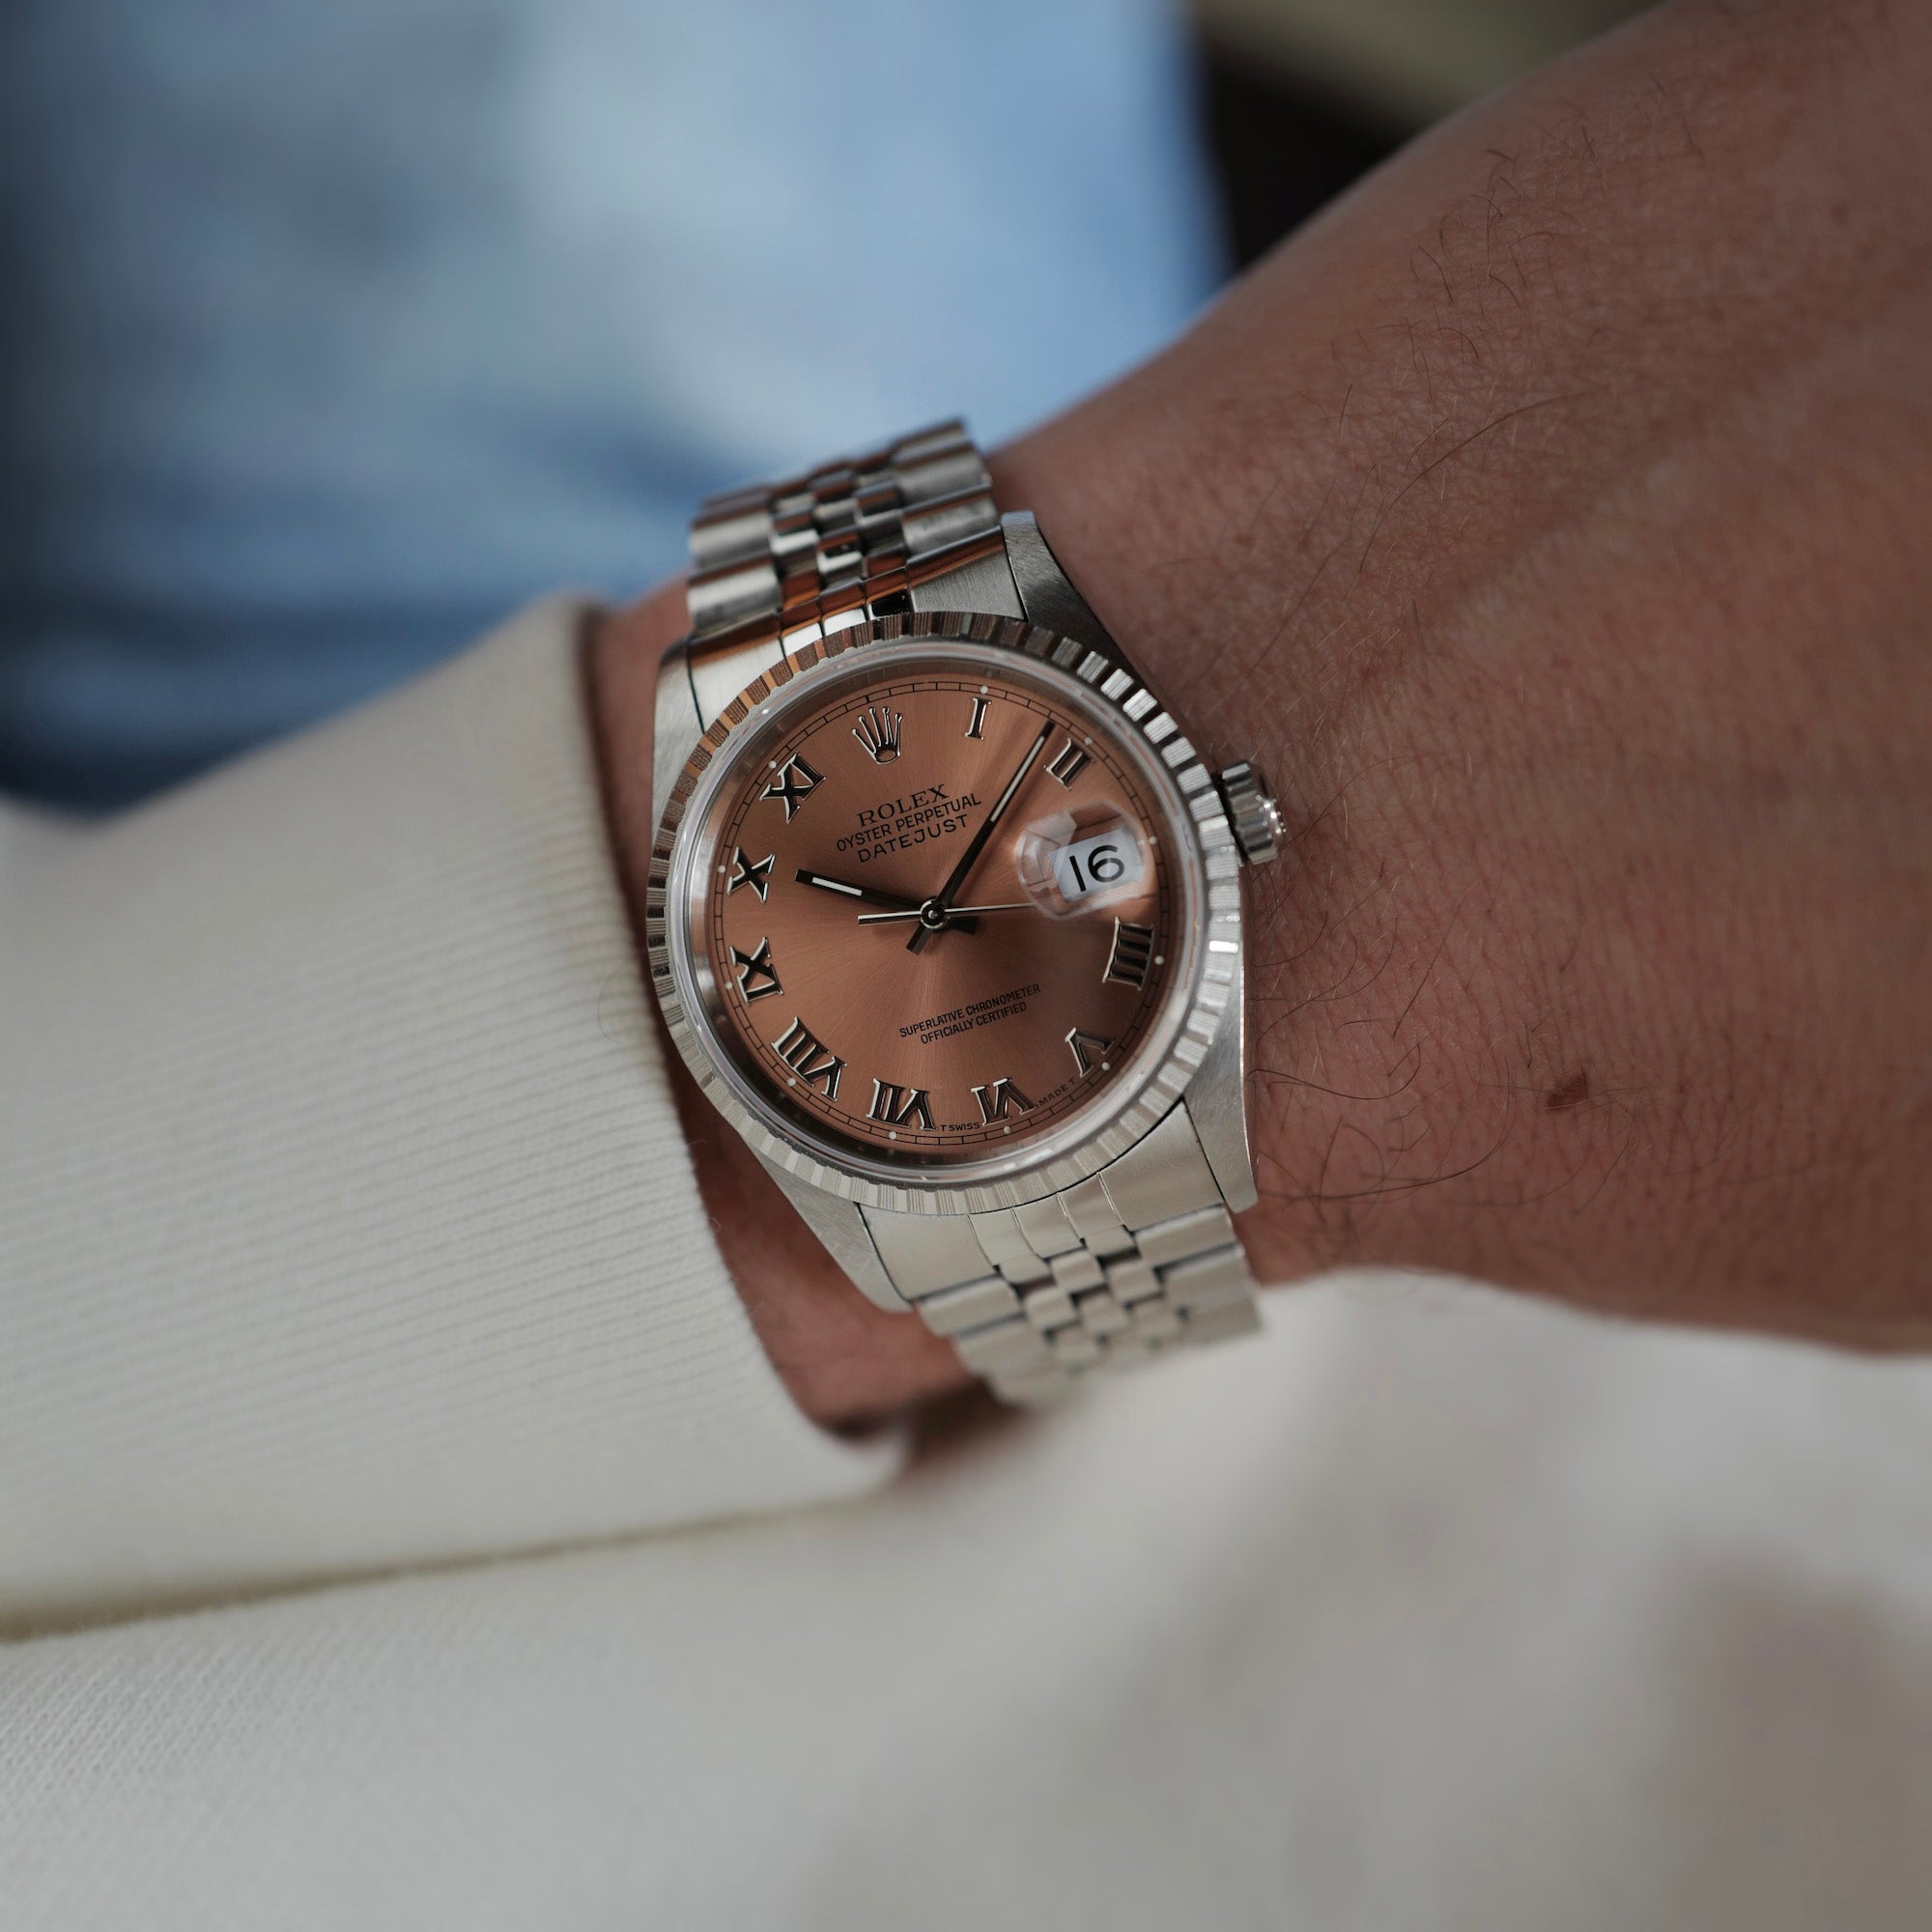 Rolex - Rolex Steel Datejust Ref. 16220 with Salmon Dial - The Keystone Watches